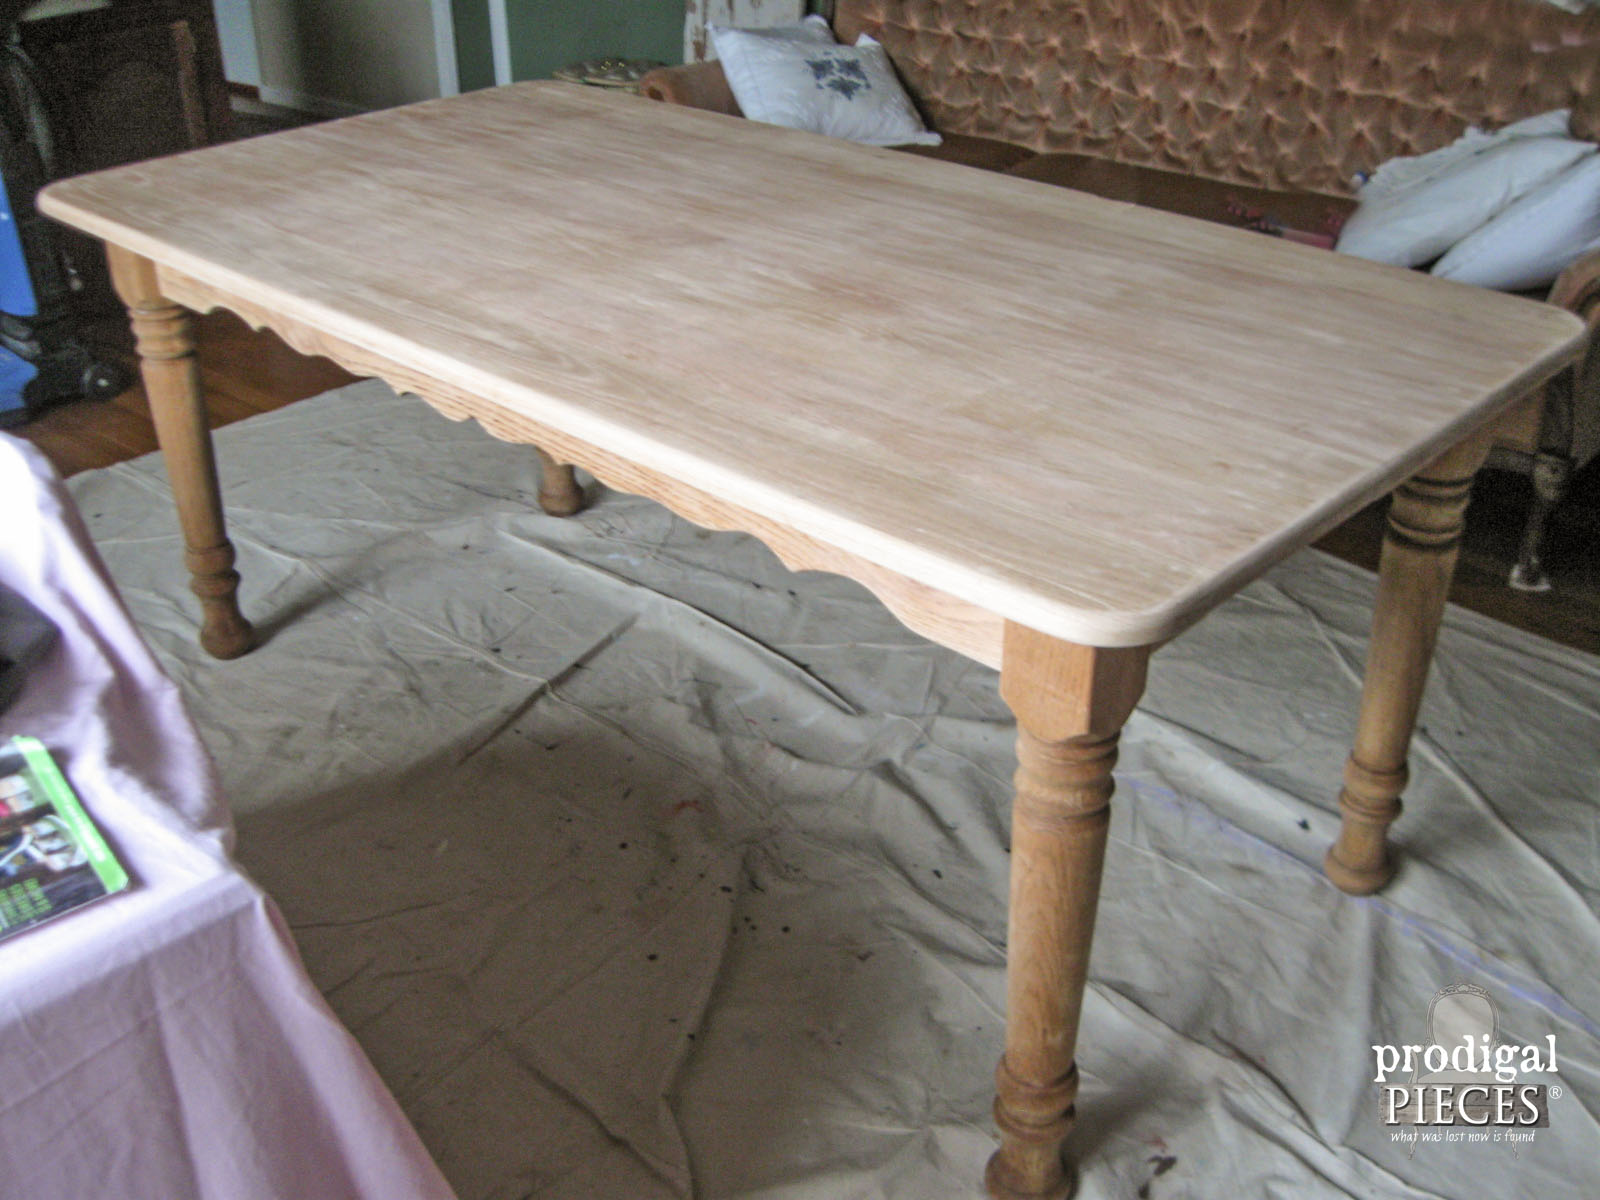 Side View of Farmhouse Table for Whitewash | Prodigal Pieces | www.prodigalpieces.com